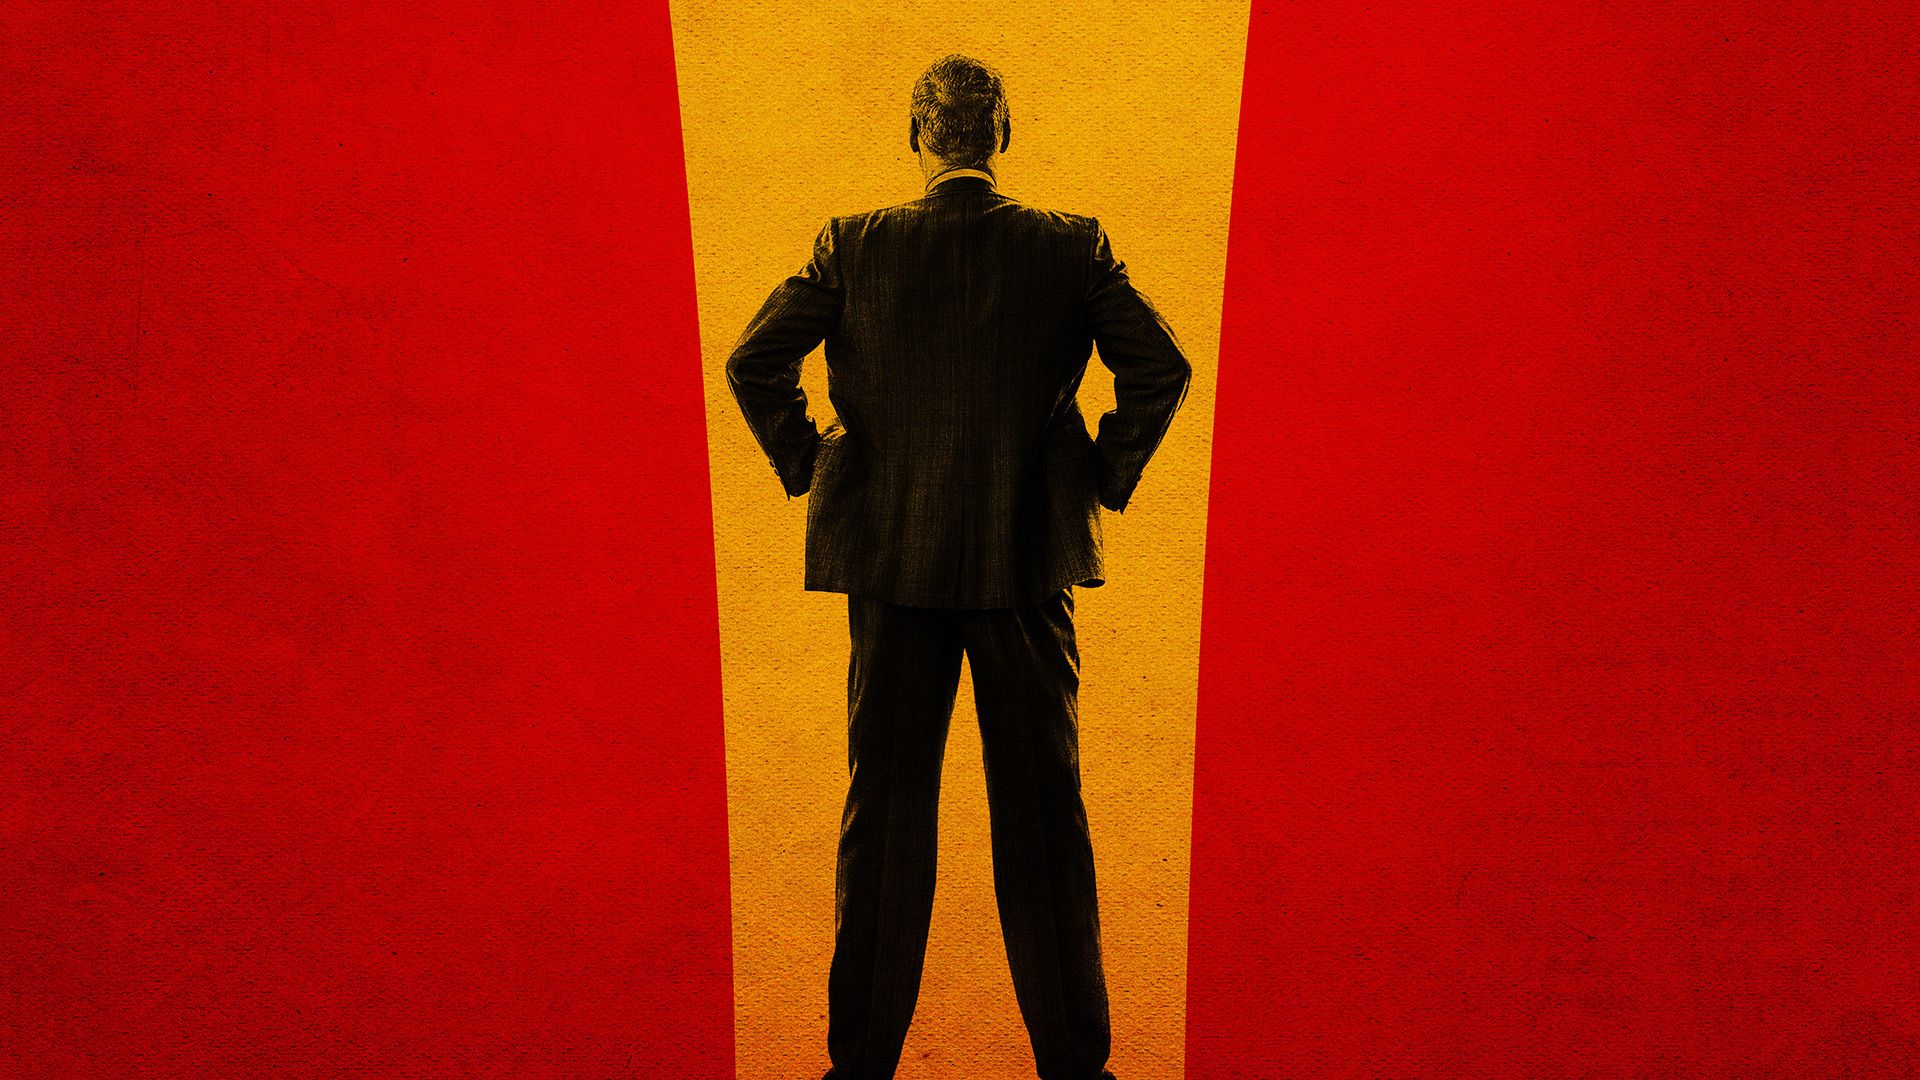 Movie The Founder Wallpaper:1920x1080